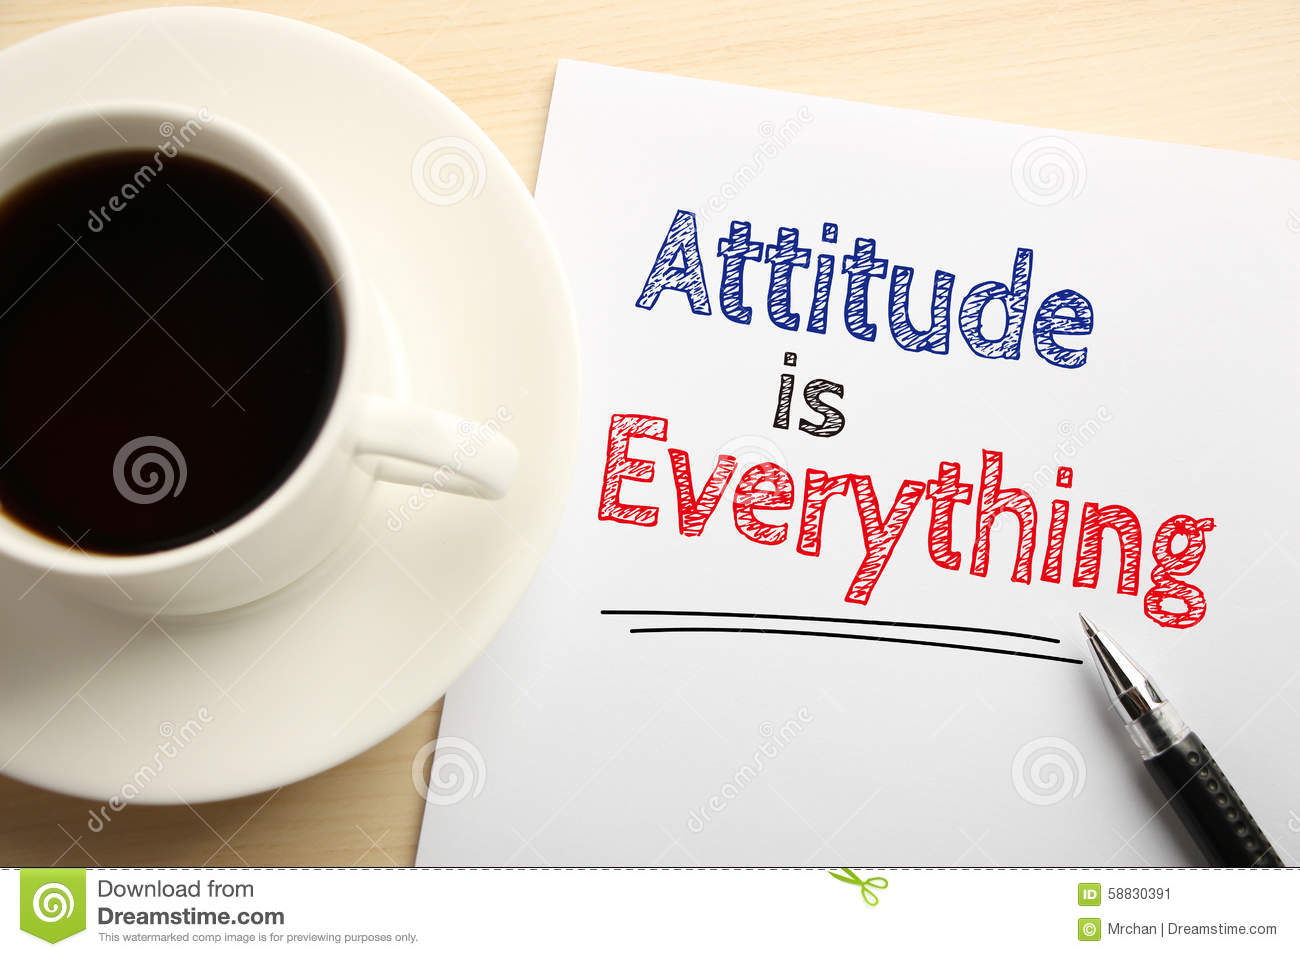 attitude-everything-text-written-white-paper-pen-cup-coffee-aside-58830391.jpg